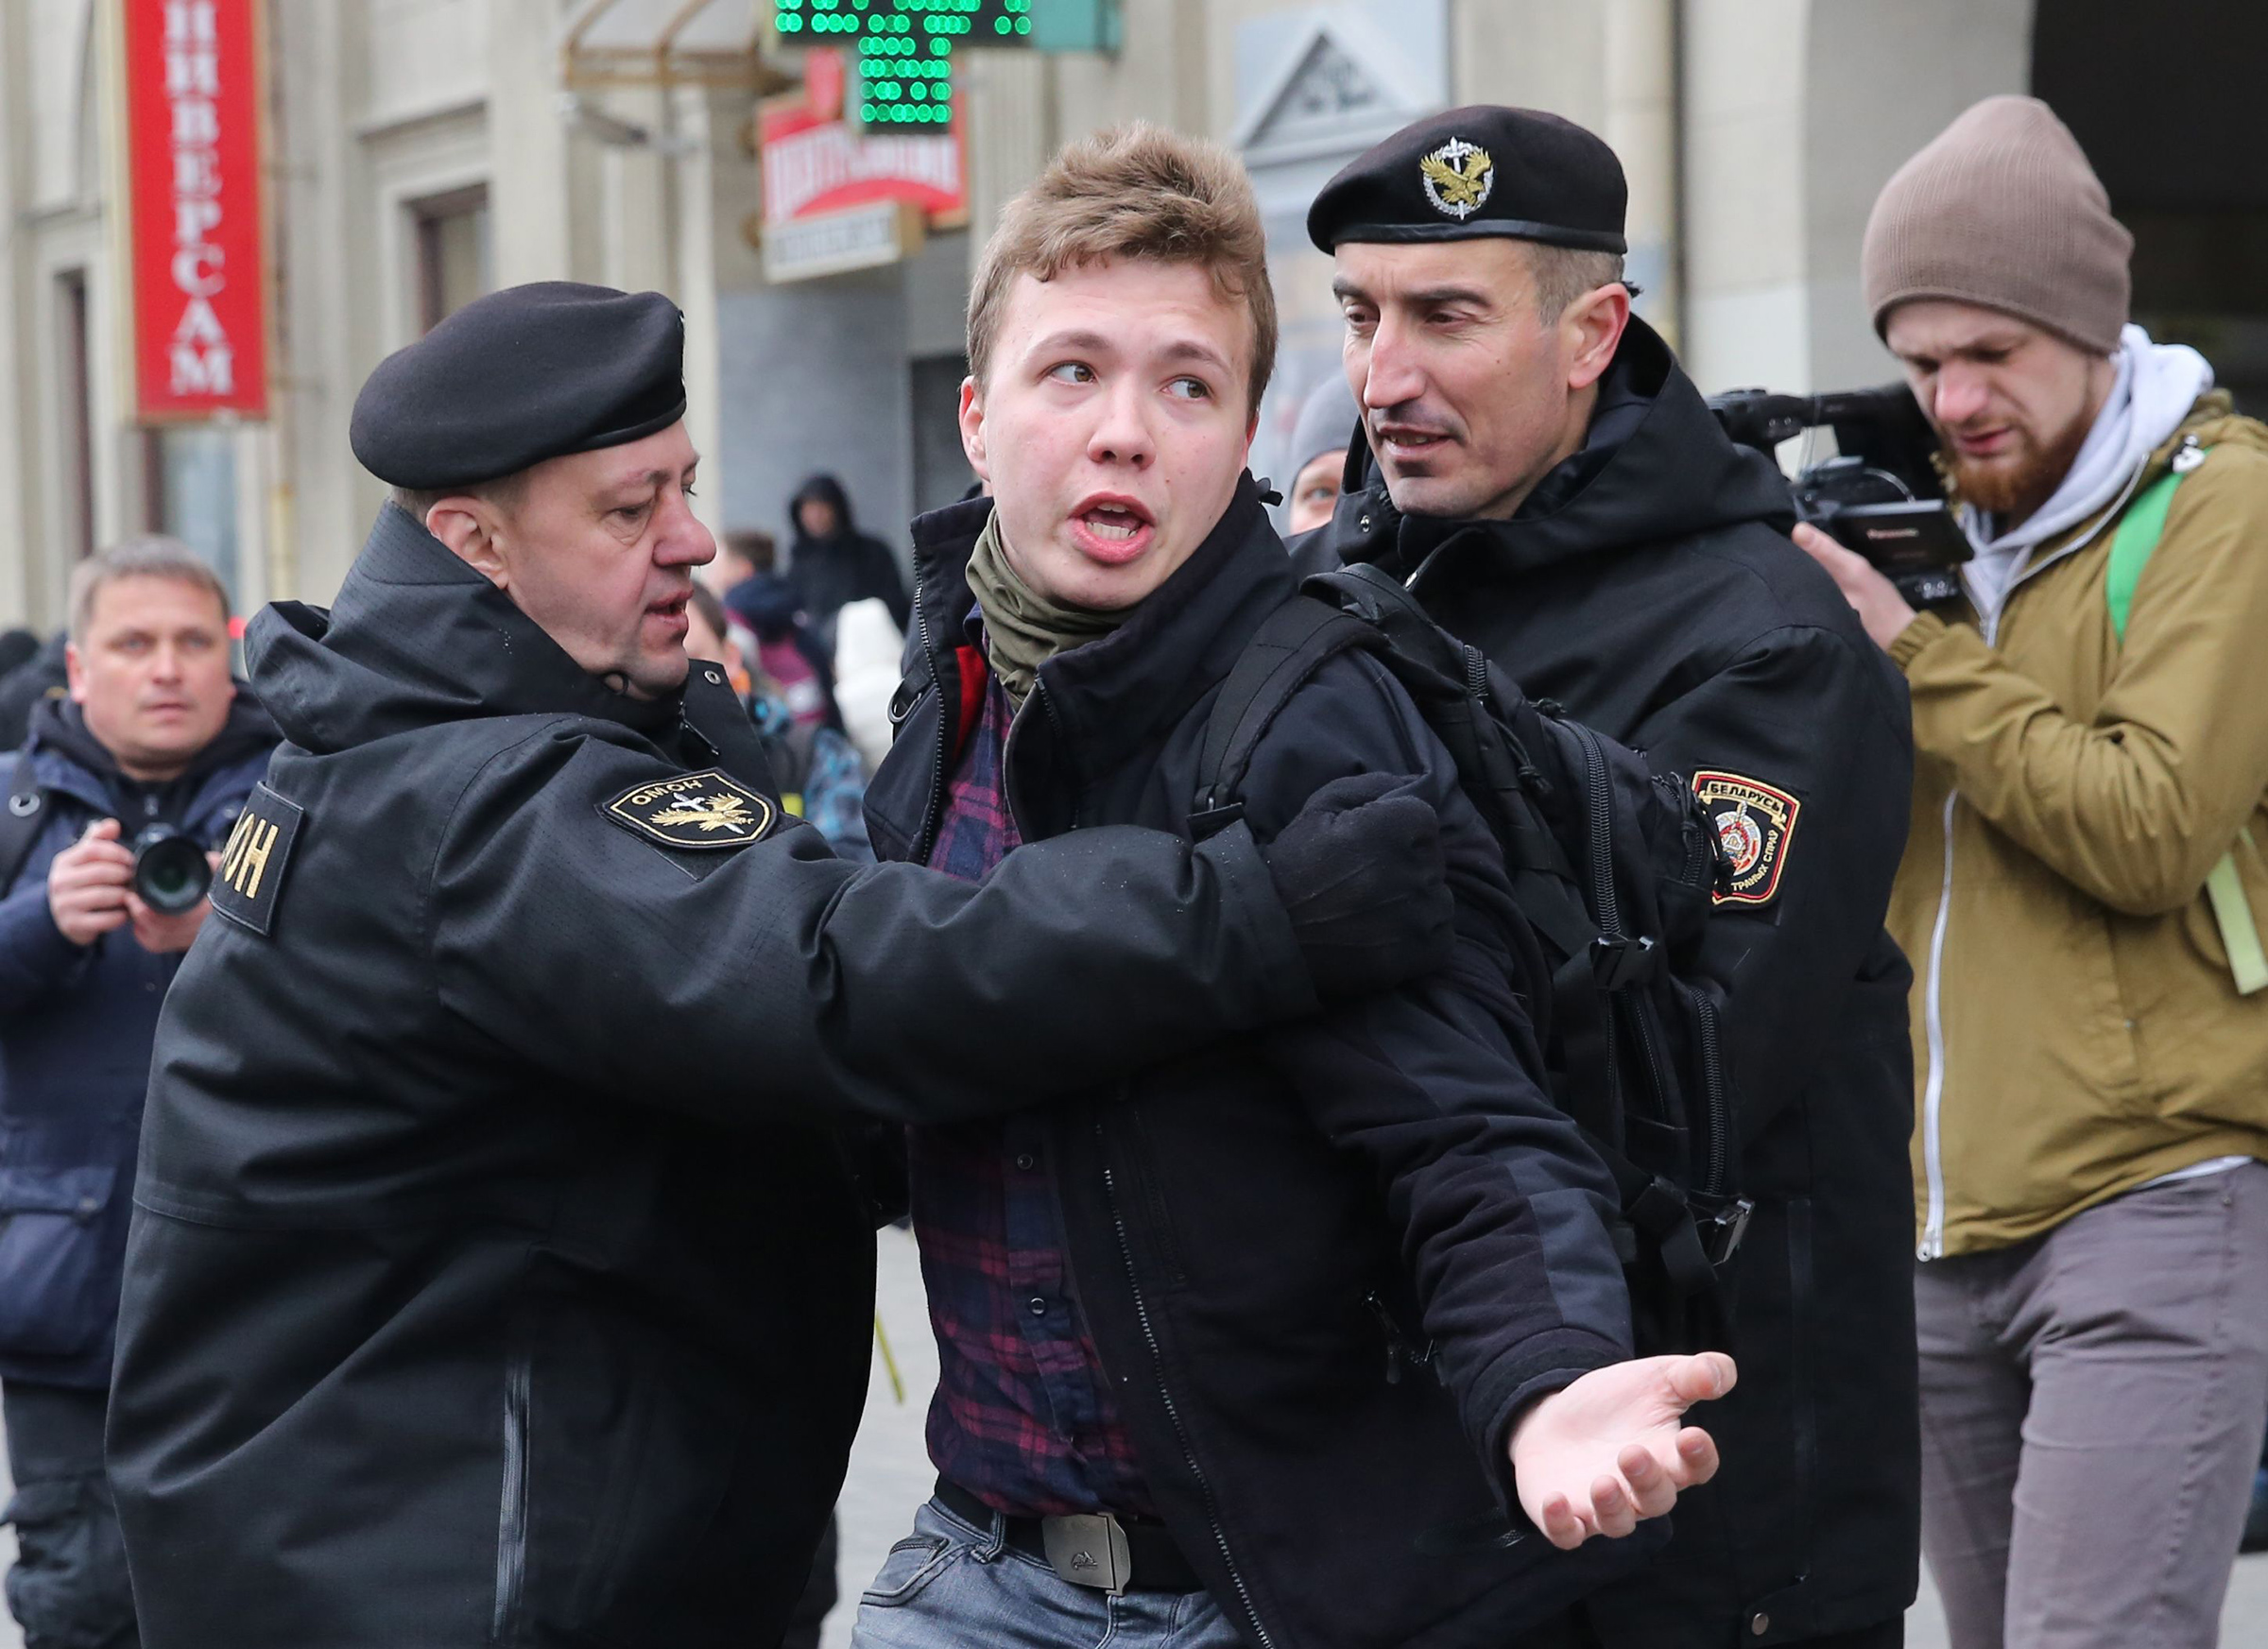 In March 2017, police officers detain journalist Roman Protasevich while attempting to cover a rally in Minsk.